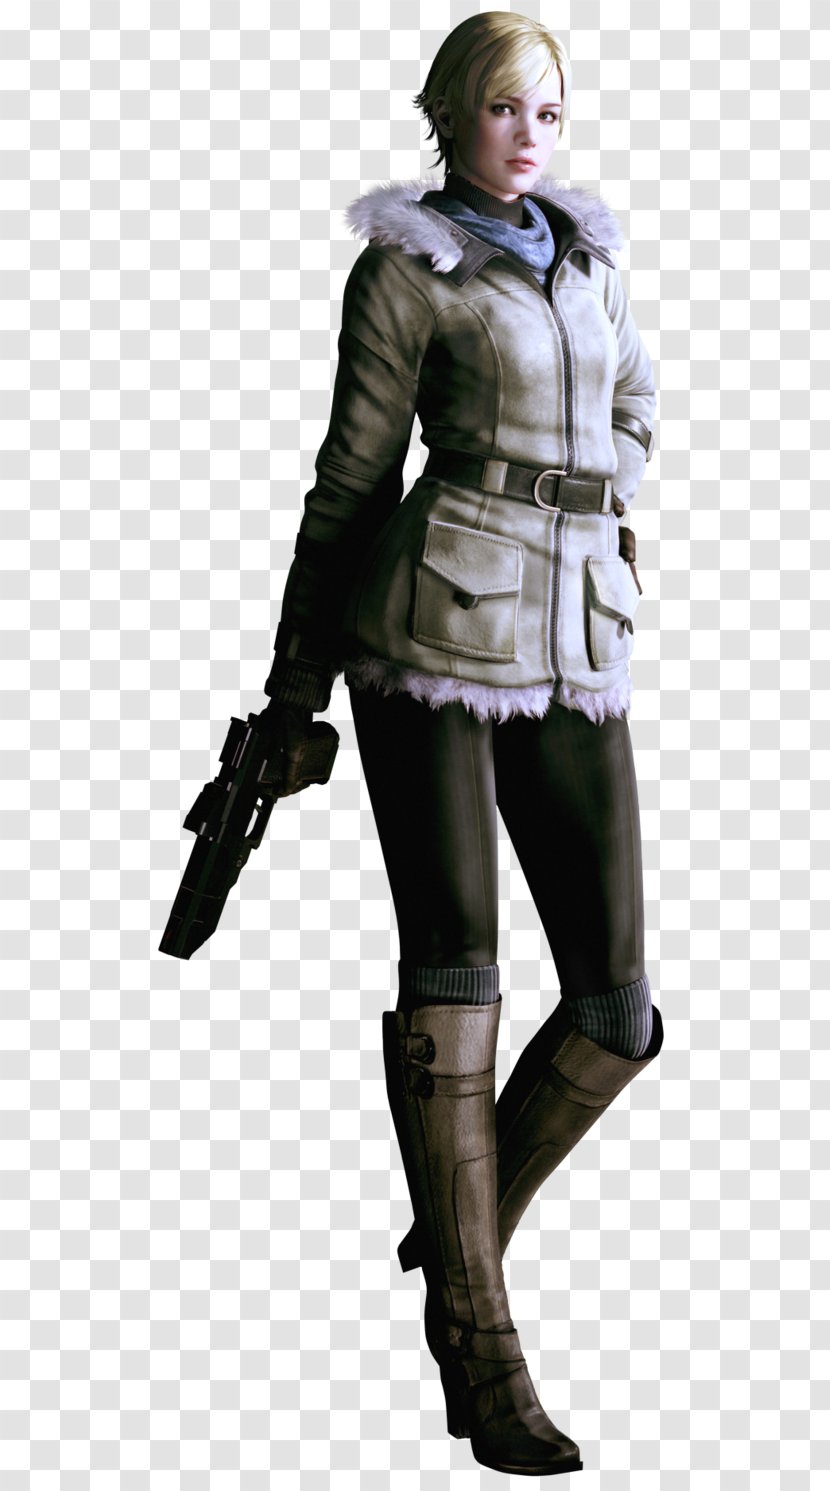 Resident Evil 6 Leon S. Kennedy Jill Valentine Chris Redfield Rebecca Chambers - Joint Transparent PNG